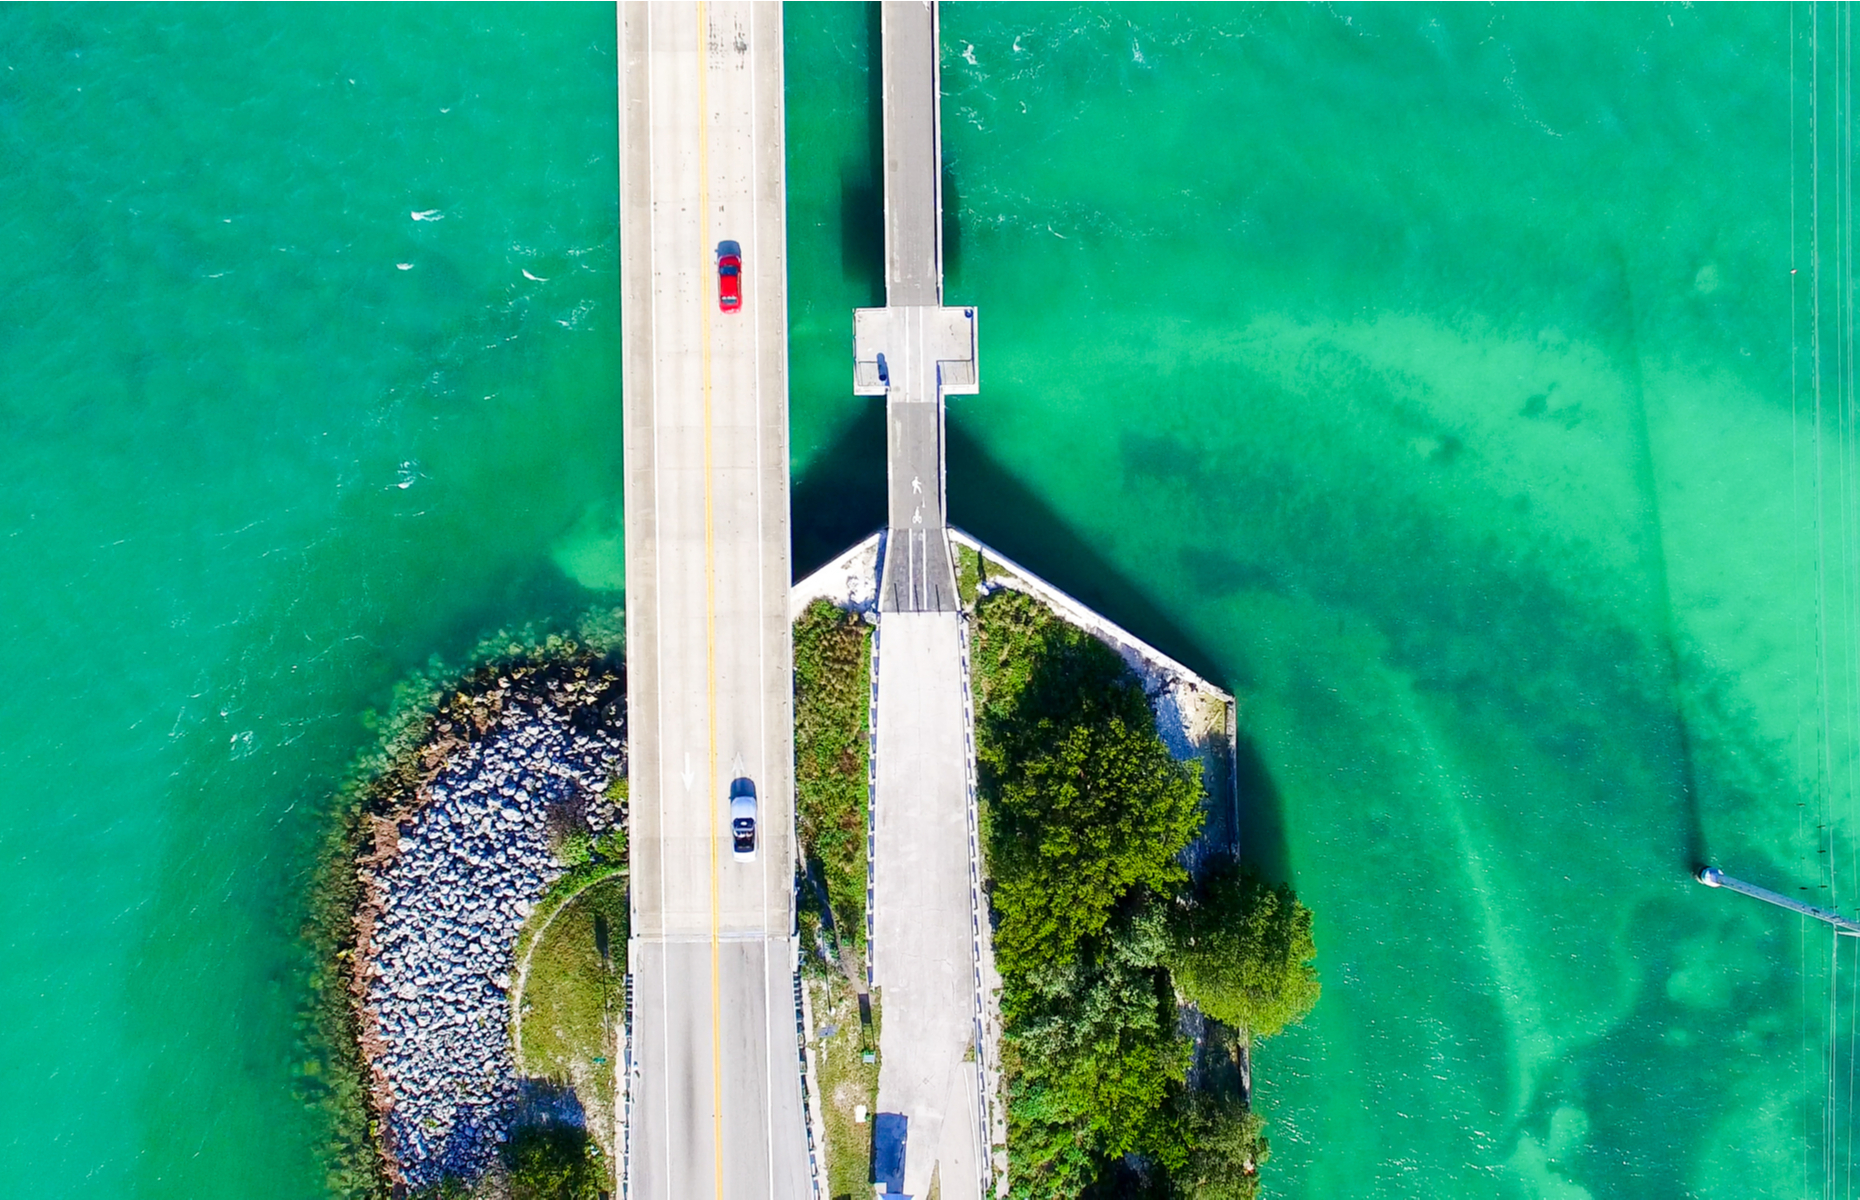 <p>Made famous in commercials and movies, the <a href="https://www.frommers.com/trip-ideas/road-trip/miami-to-the-keys-driving-the-overseas-highway" title="https://www.frommers.com/trip-ideas/road-trip/miami-to-the-keys-driving-the-overseas-highway">Overseas Highway</a> is even more impressive when driven in person. It spans the green-blue seawater in a series of bridges that take you through the Florida Keys. The 150-mile trip is actually the southernmost leg of Highway US 1, and is built on an old, narrow railroad bed so the highway is often just two lanes, making the trip from Miami to Key West between 3.5 and four hours. But the scenery is great and there are a lot of nifty places to stop, so you won’t complain.</p>